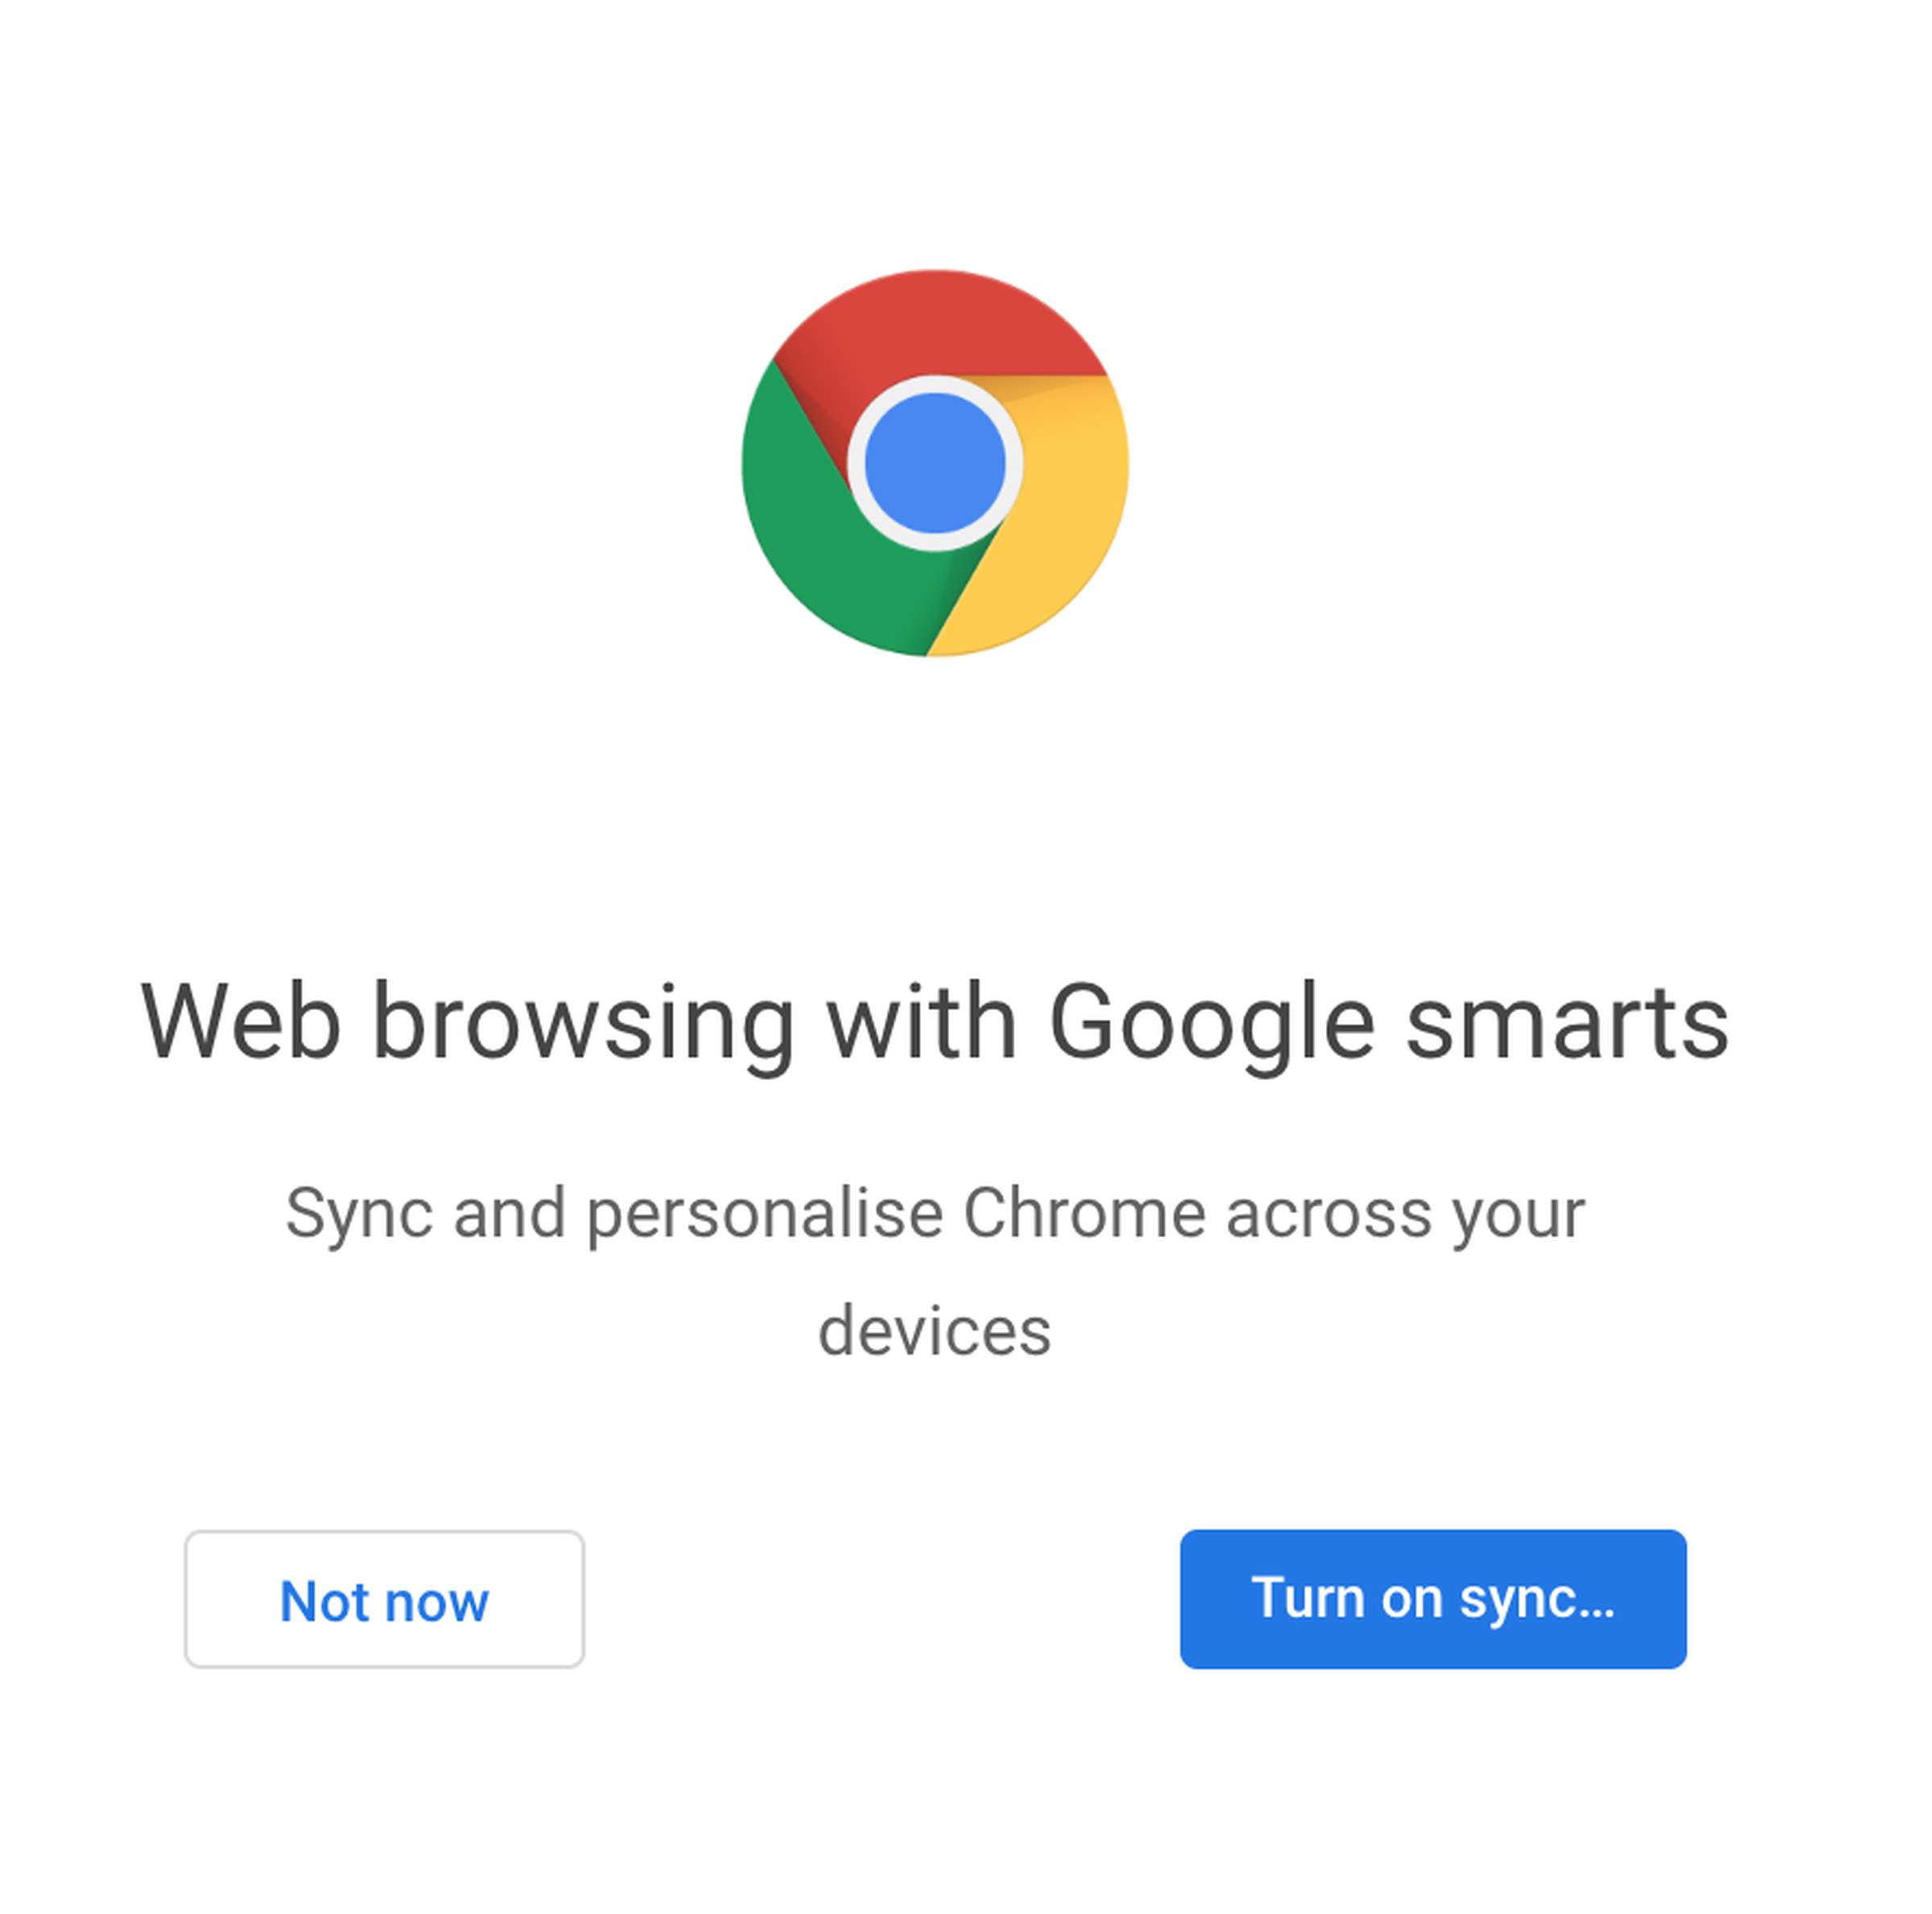 Chrome prompts users to turn on Sync after adding a new user.